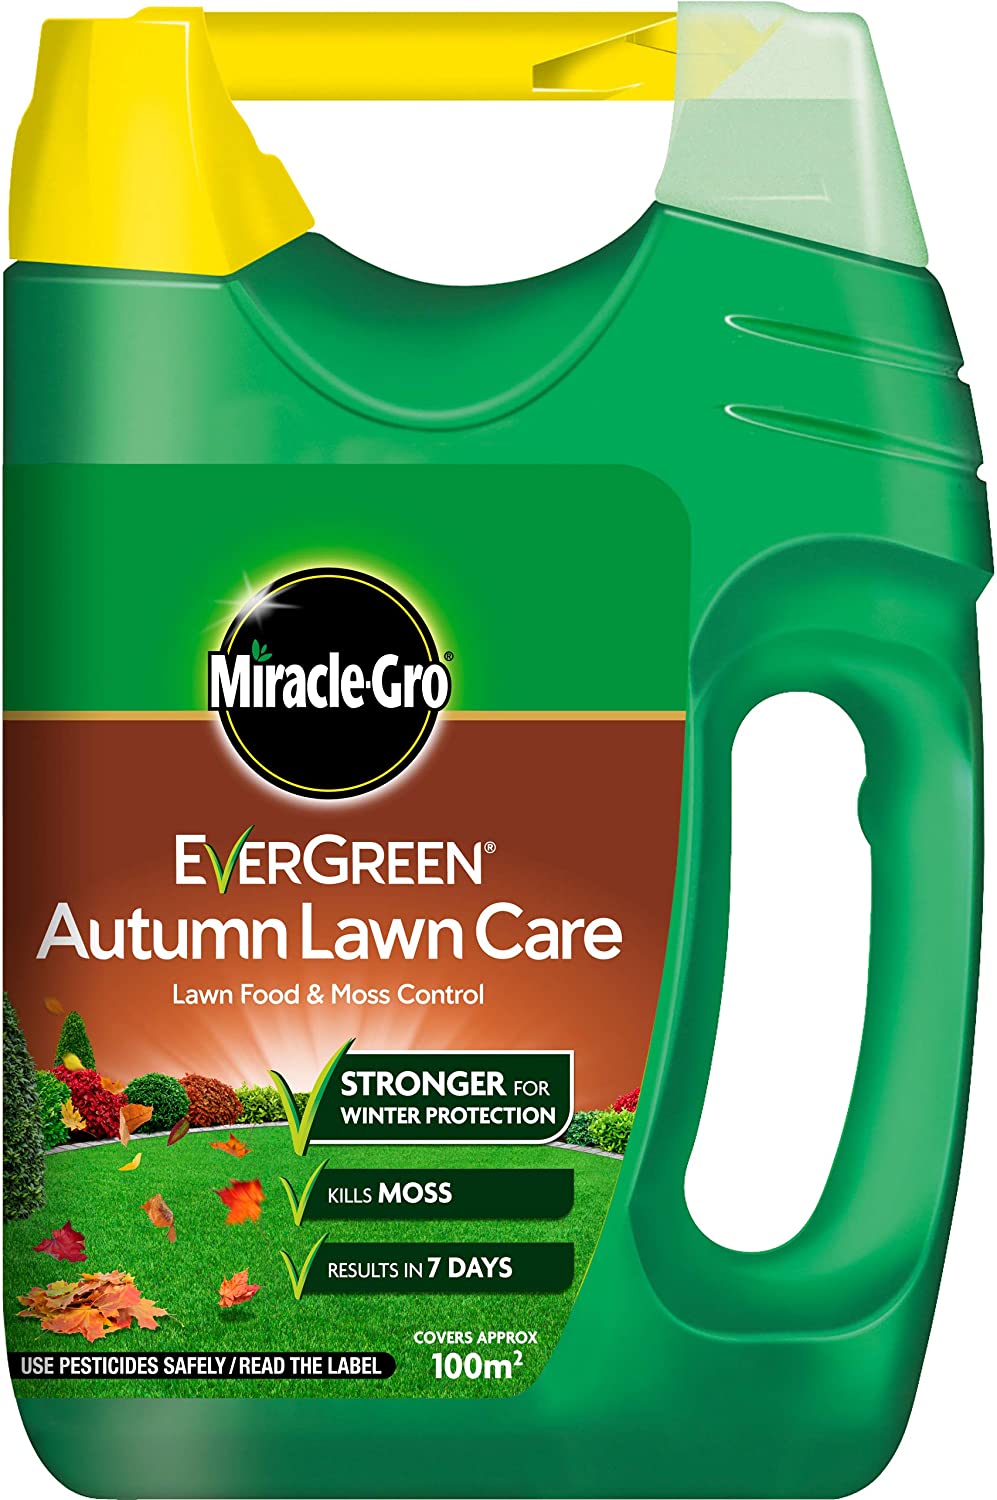 Miracle-Gro-EverGreen-Autumn-Lawn-Care-Spreader-Lawn-Food-&-Moss-Control-3.5 kg-100-m2